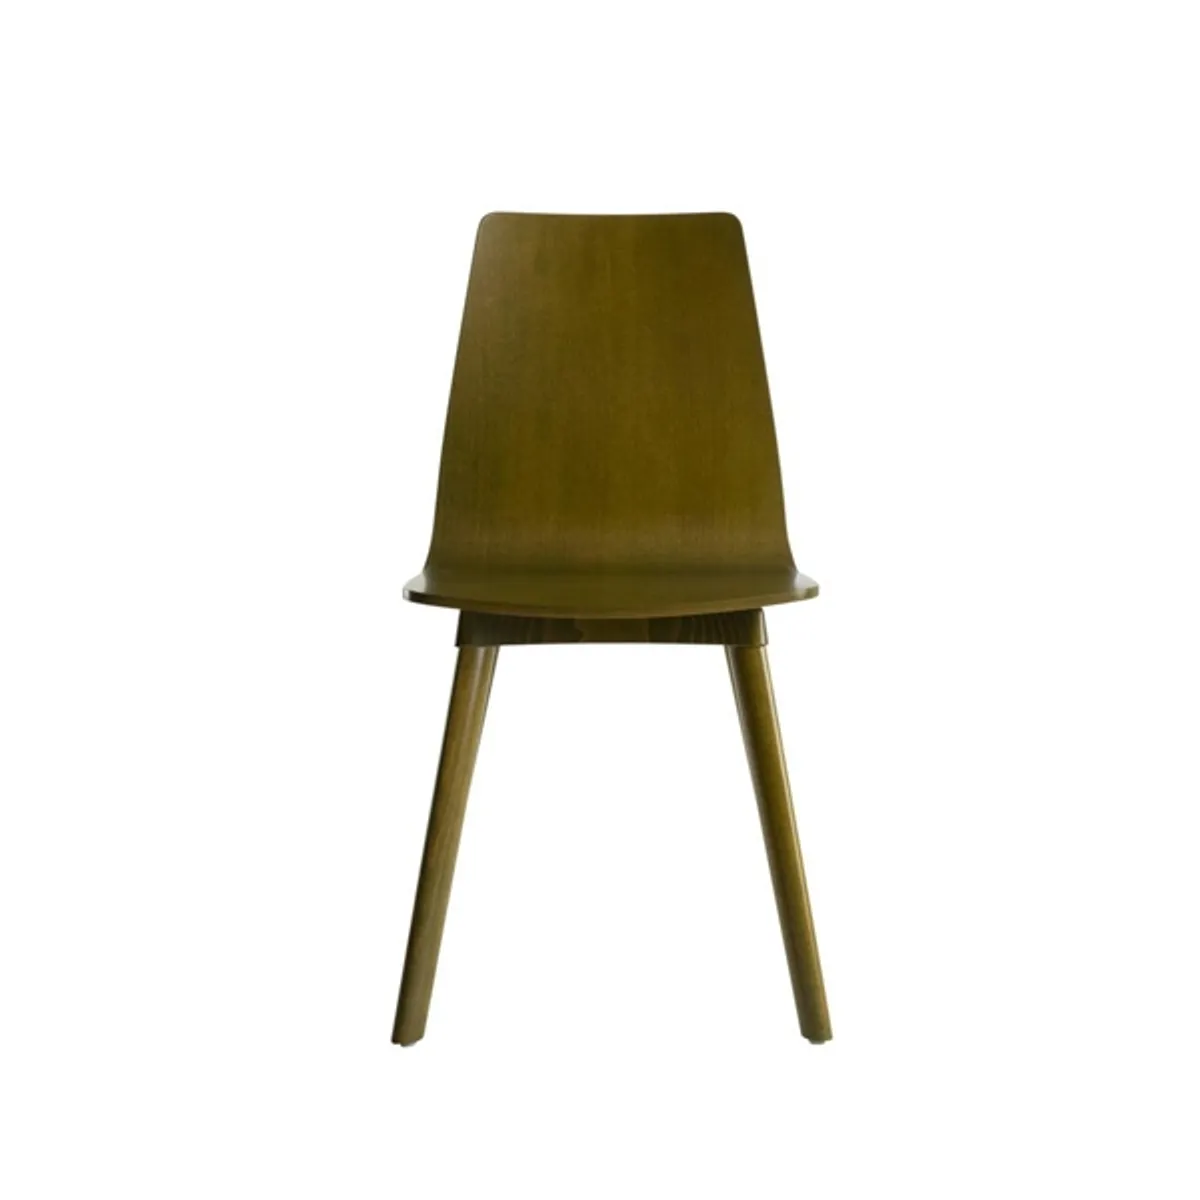 Allendale wood side chair Inside Out Contracts4